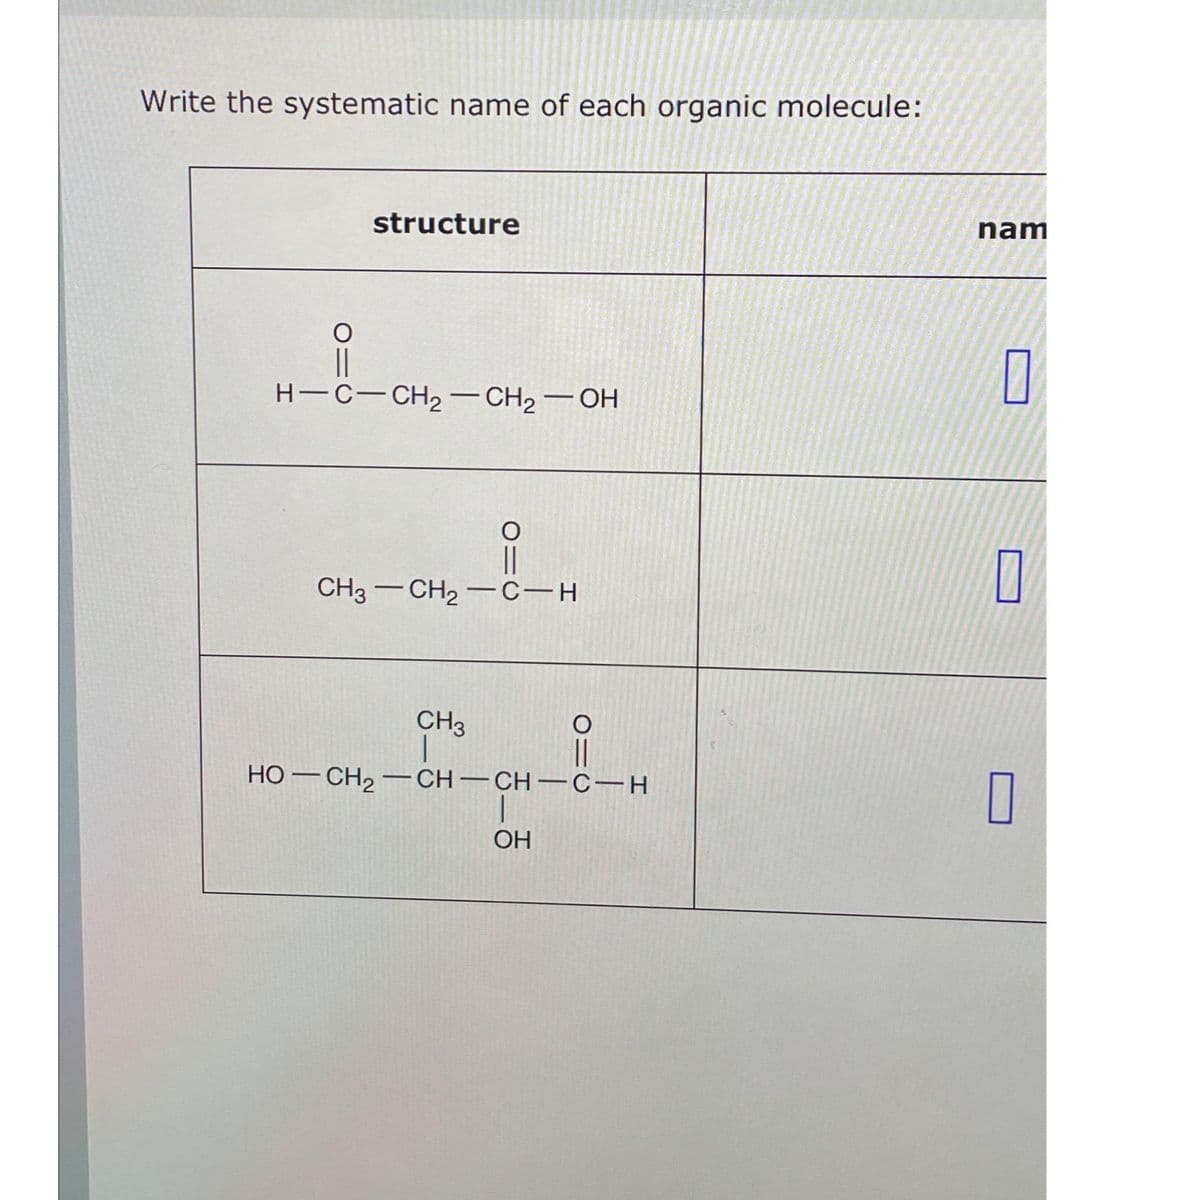 Write the systematic name of each organic molecule:
O=
structure
H-C-CH₂-CH₂-OH
O=C
CH3–CH2−C-H
CH3
HỌ—CH2–CH–CH-CH
OH
O
nam
П
0